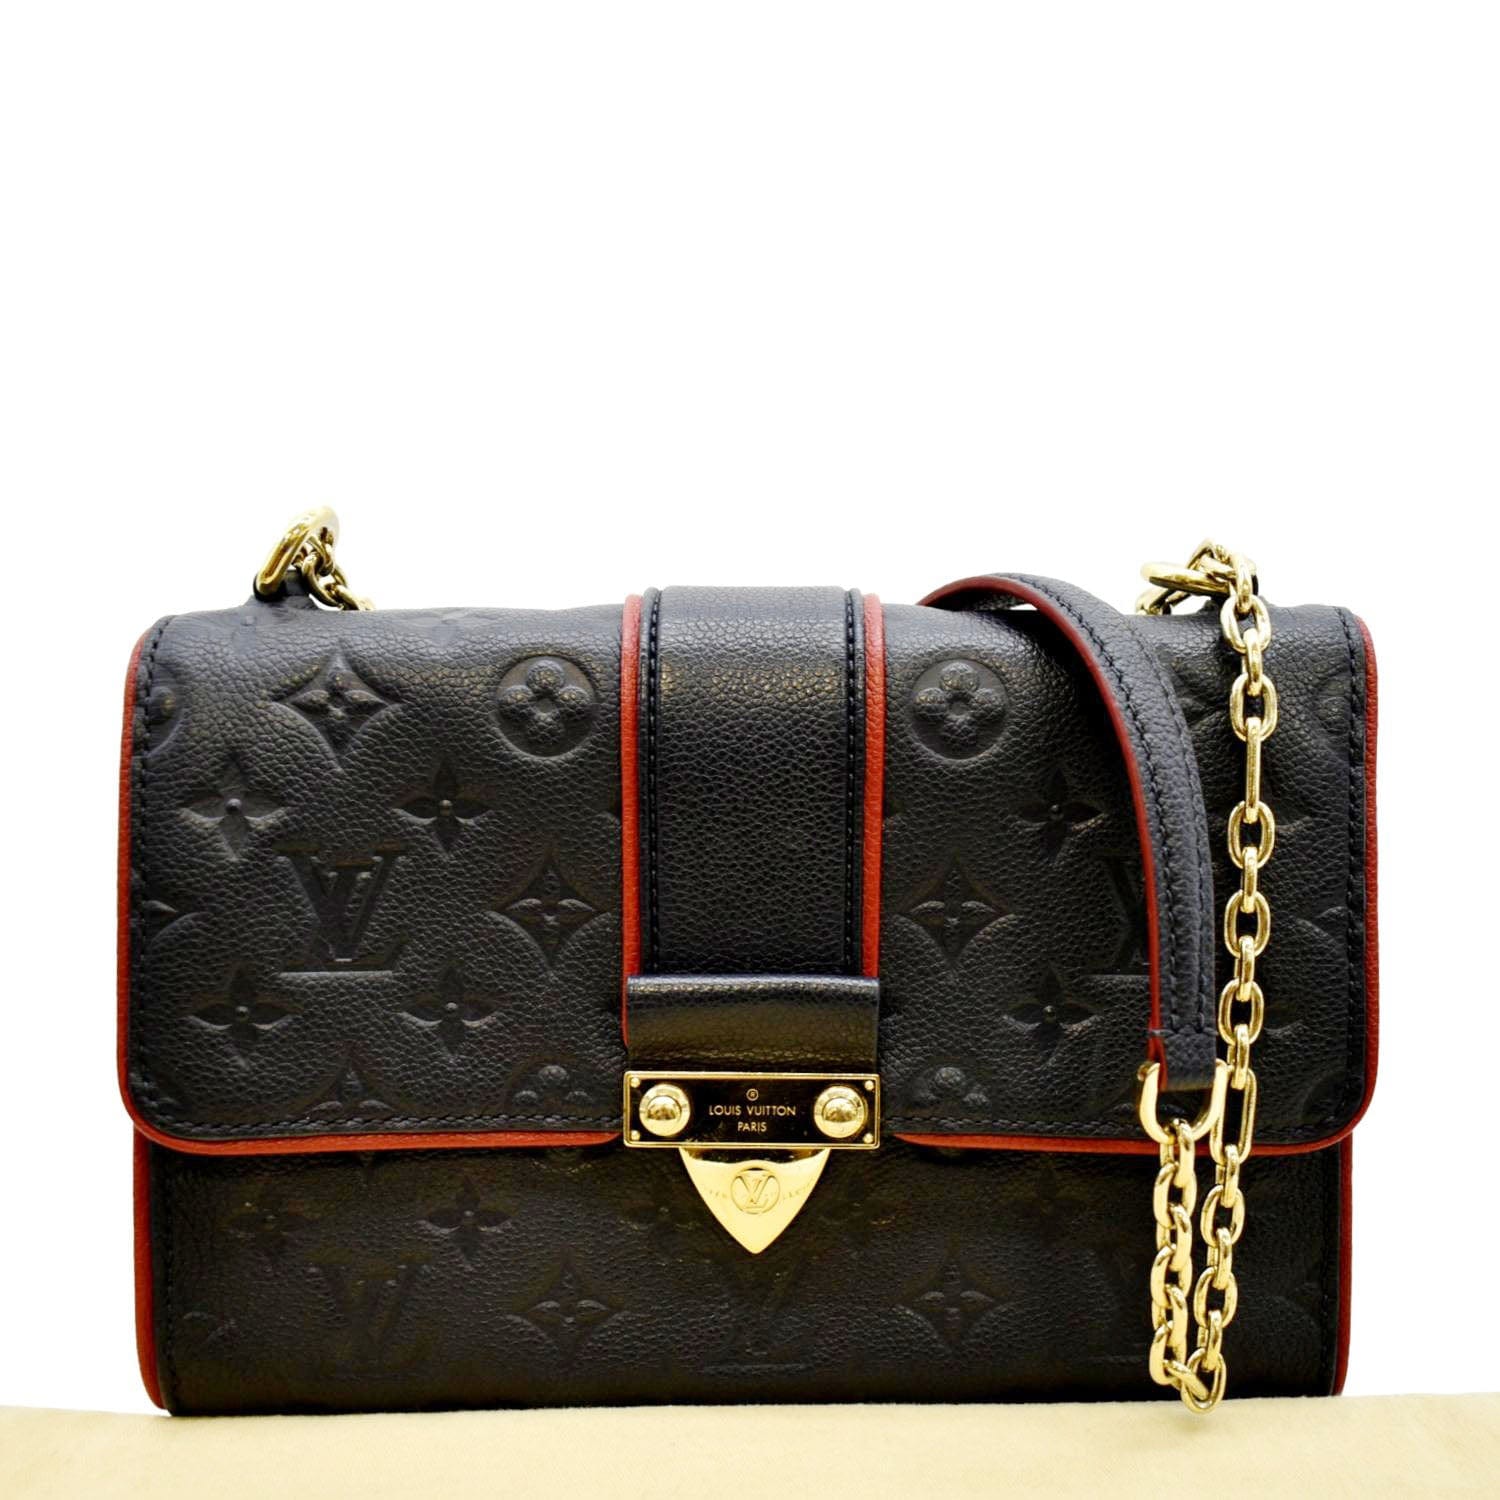 Louis Vuitton Leather Exterior Blue Bags & Handbags for Women, Authenticity Guaranteed